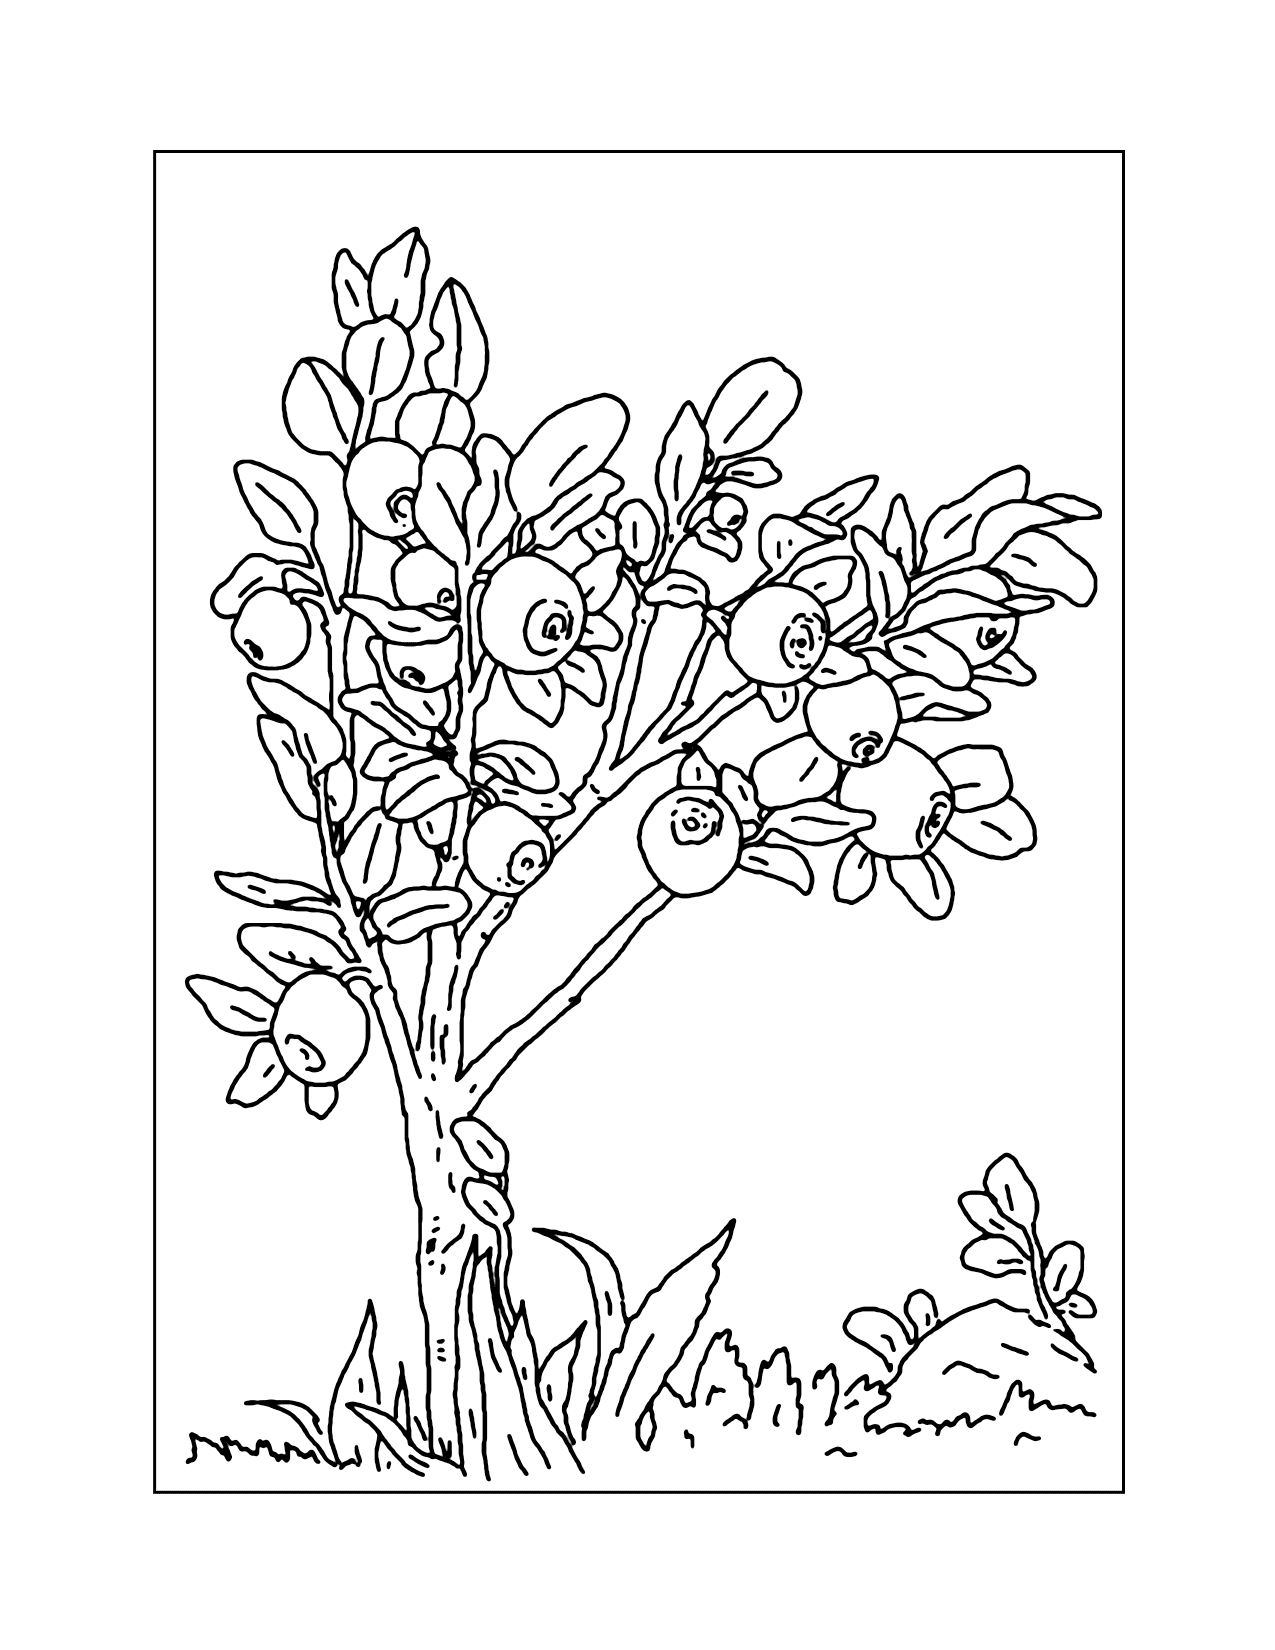 Blueberry Bush Coloring Page